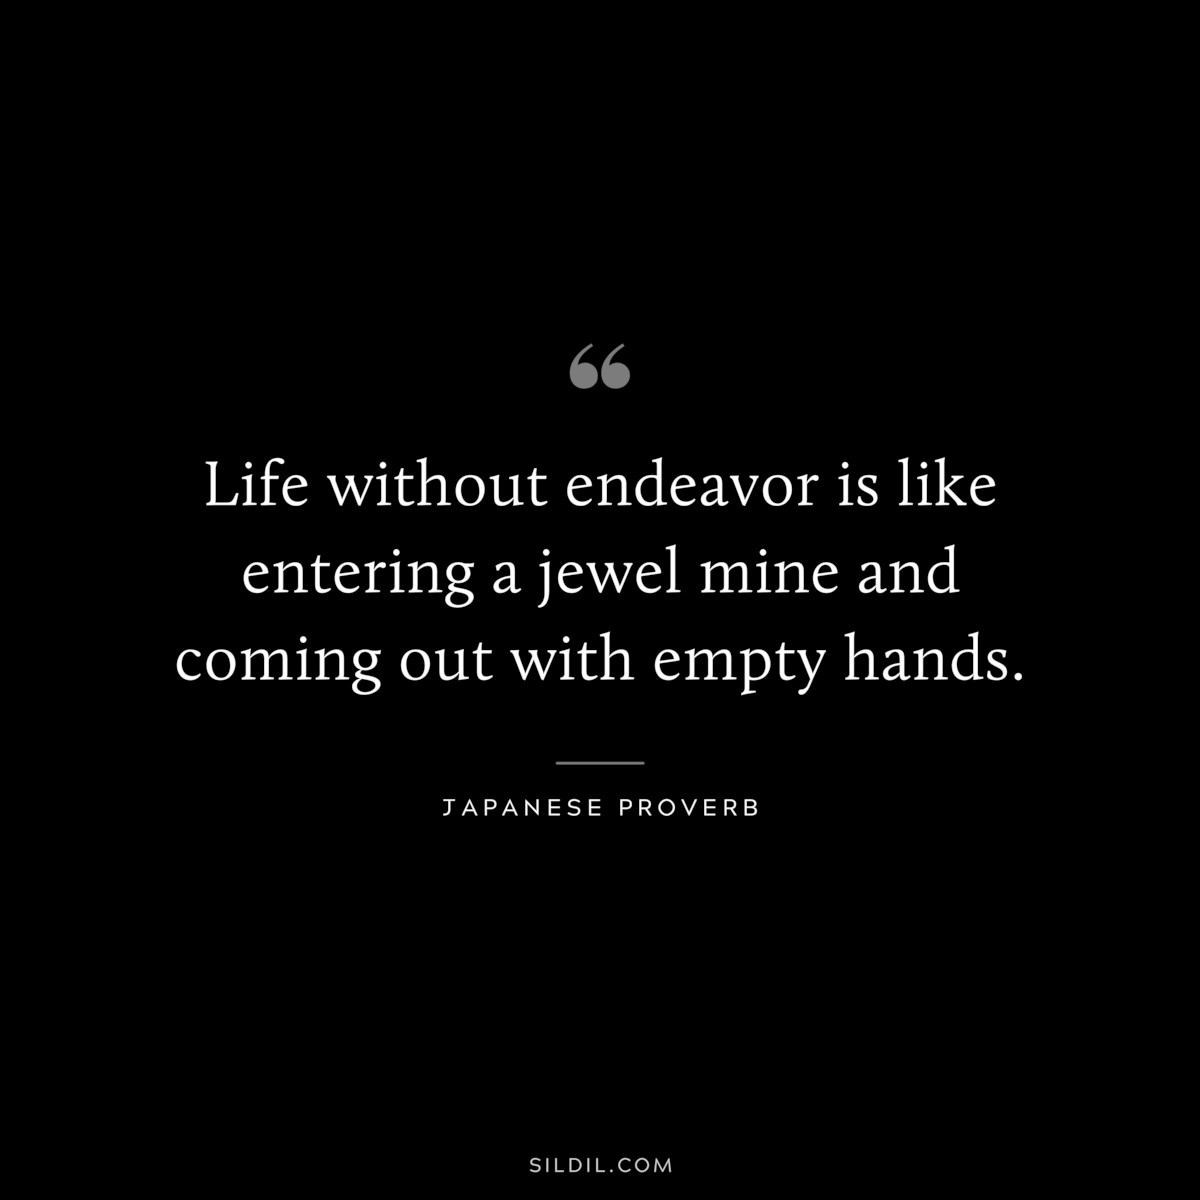 Life without endeavor is like entering a jewel mine and coming out with empty hands. ― Japanese Proverb